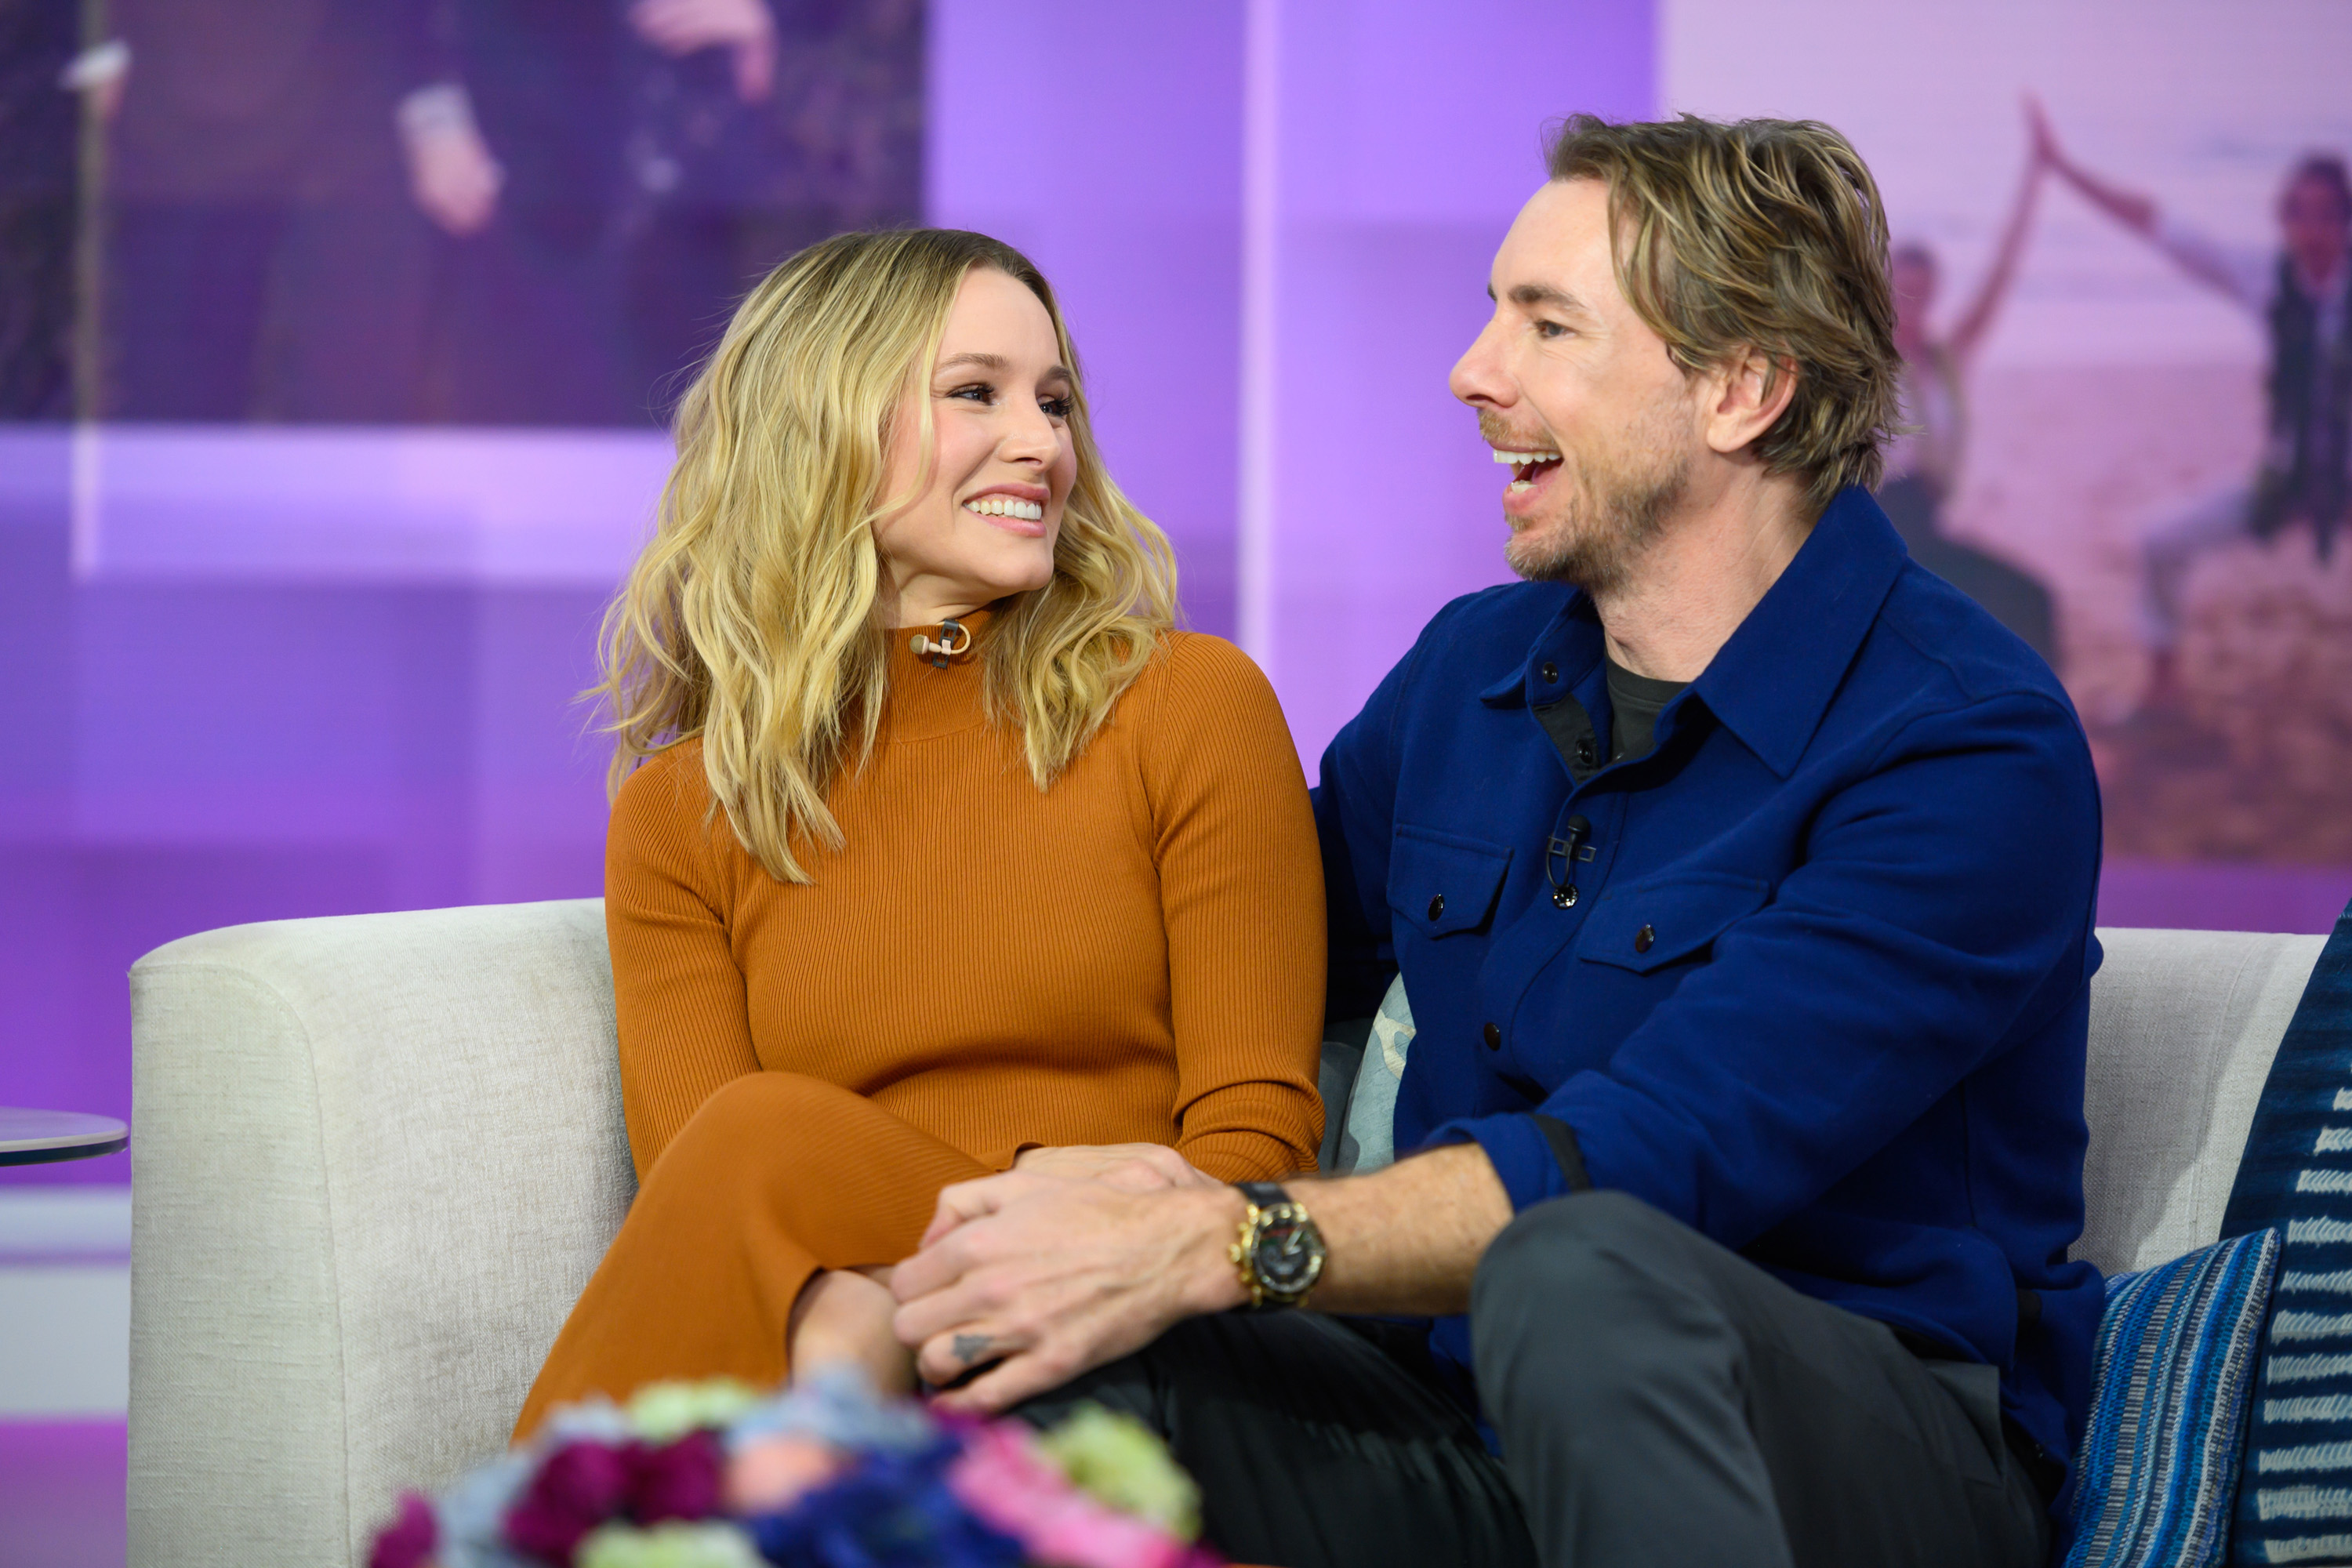 Kristen Bell and Dax Shepard have been married since 2013